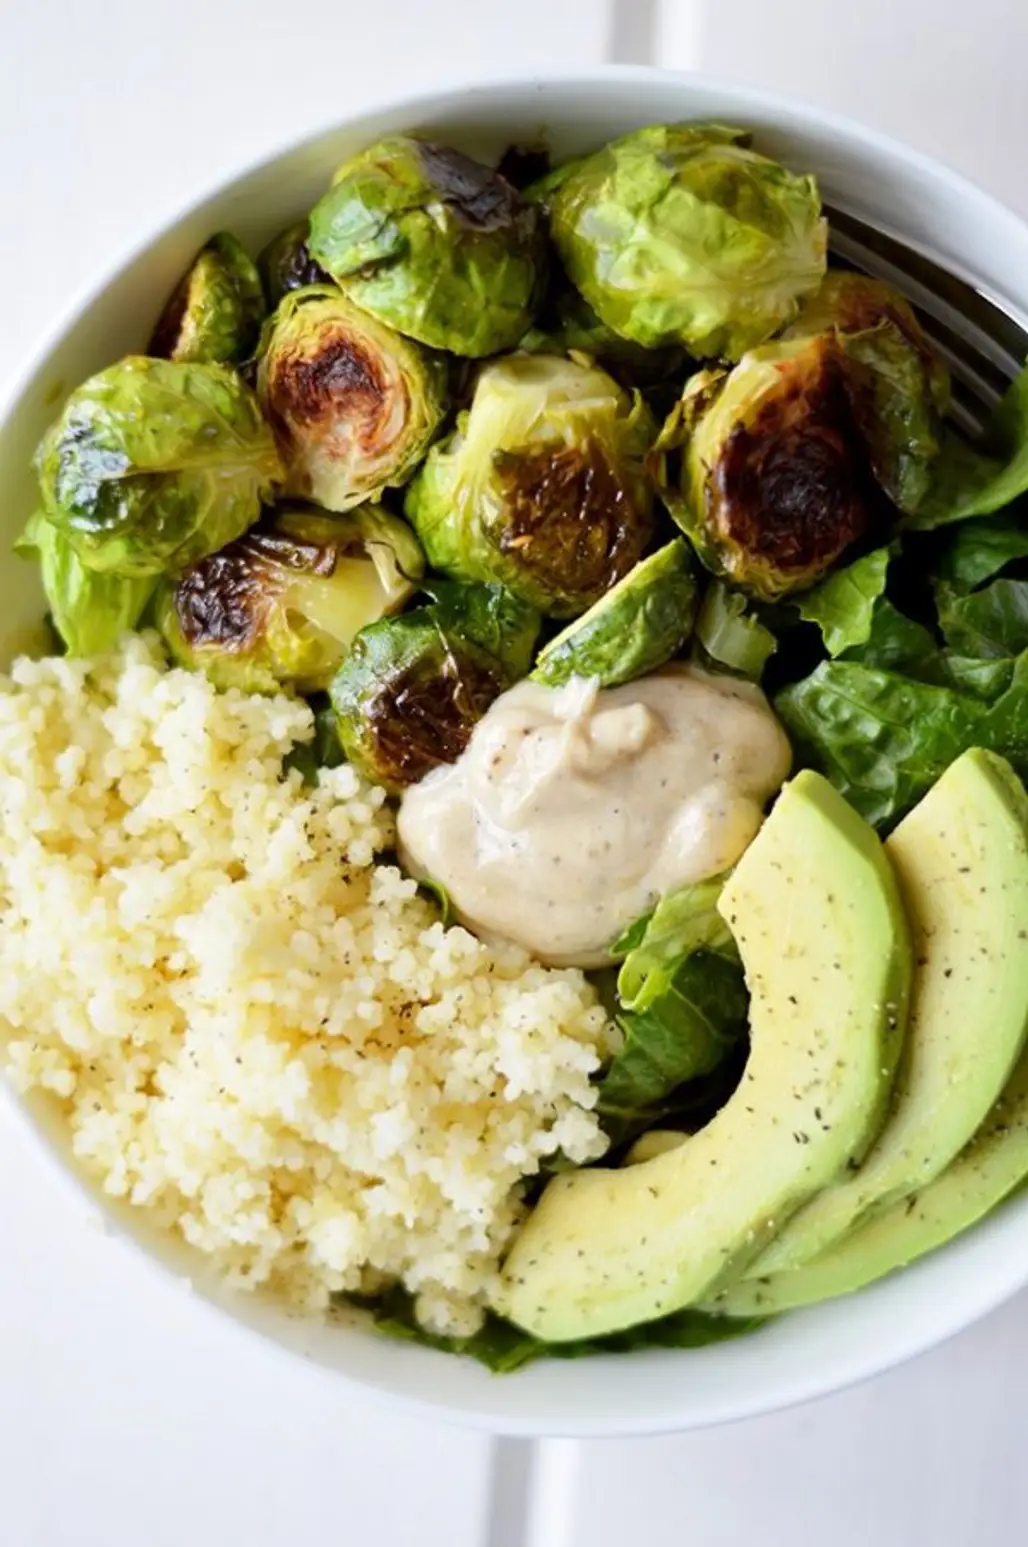 Packed with Dark Leafy Greens, Crispy Roasted Brussels Sprouts, Fluffy Couscous, Creamy Avocado and a Super Simple Vinaigrette